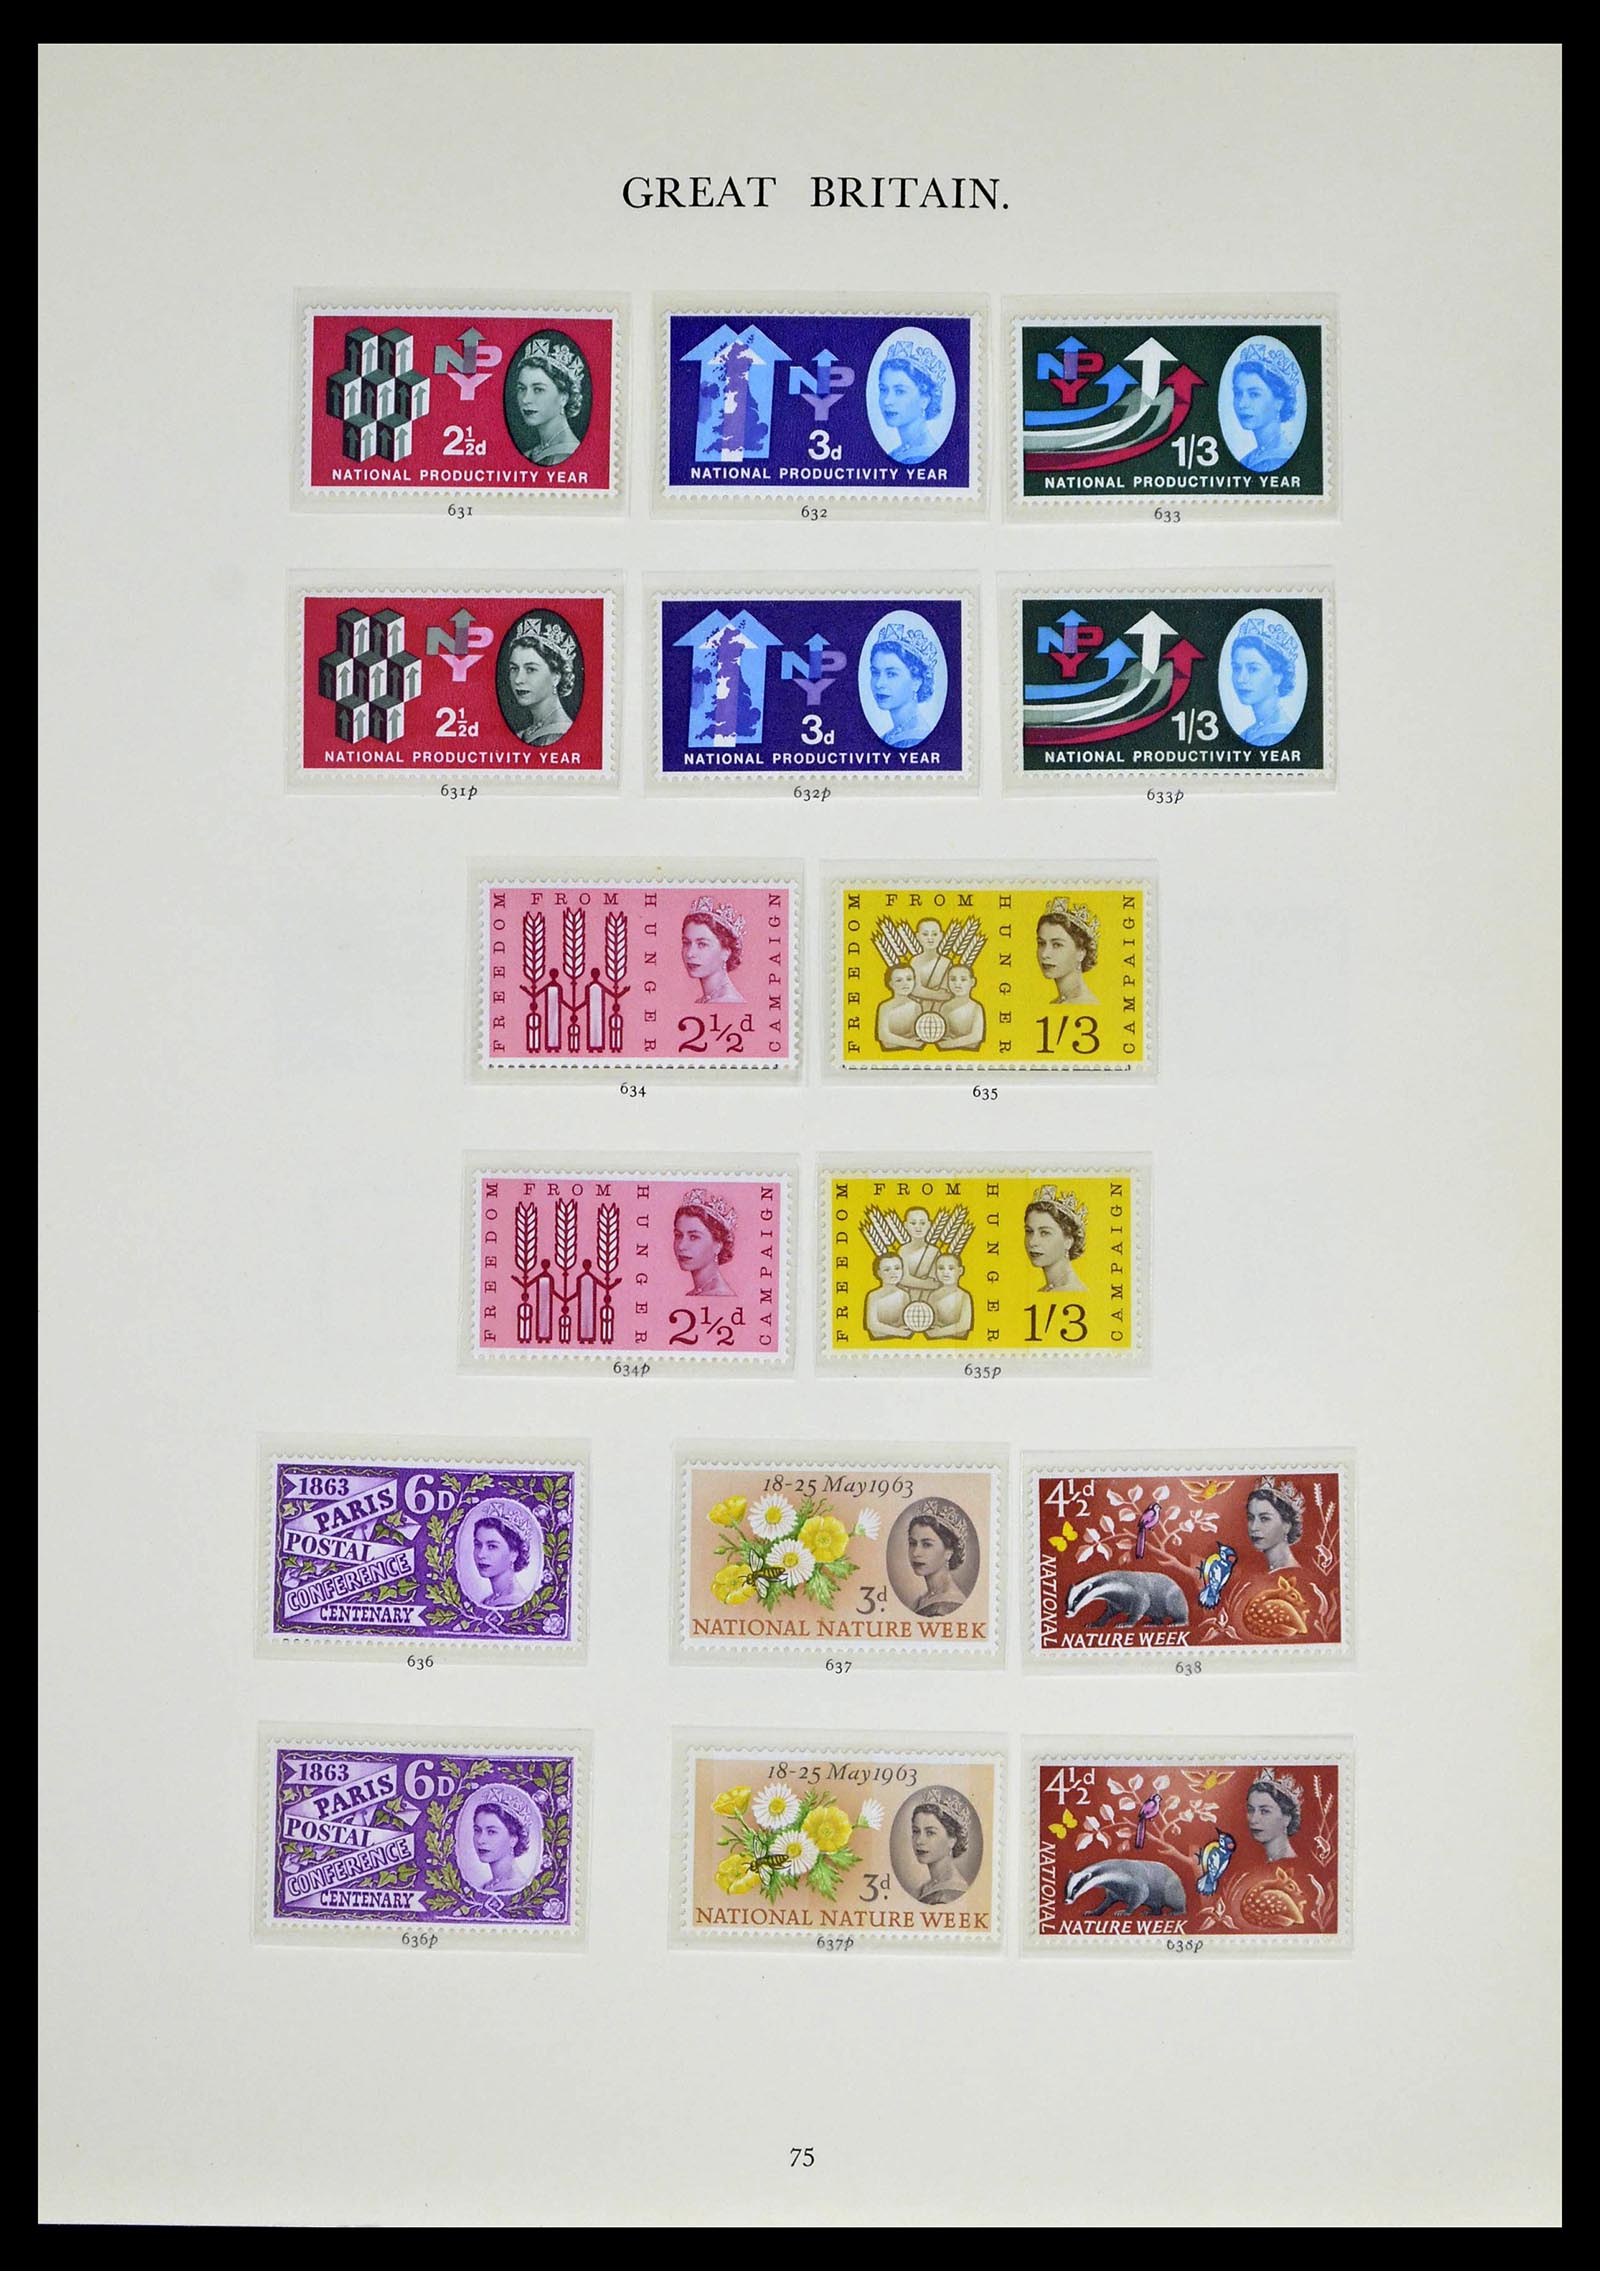 39025 0034 - Stamp collection 39025 Great Britain specialised 1840-1990.